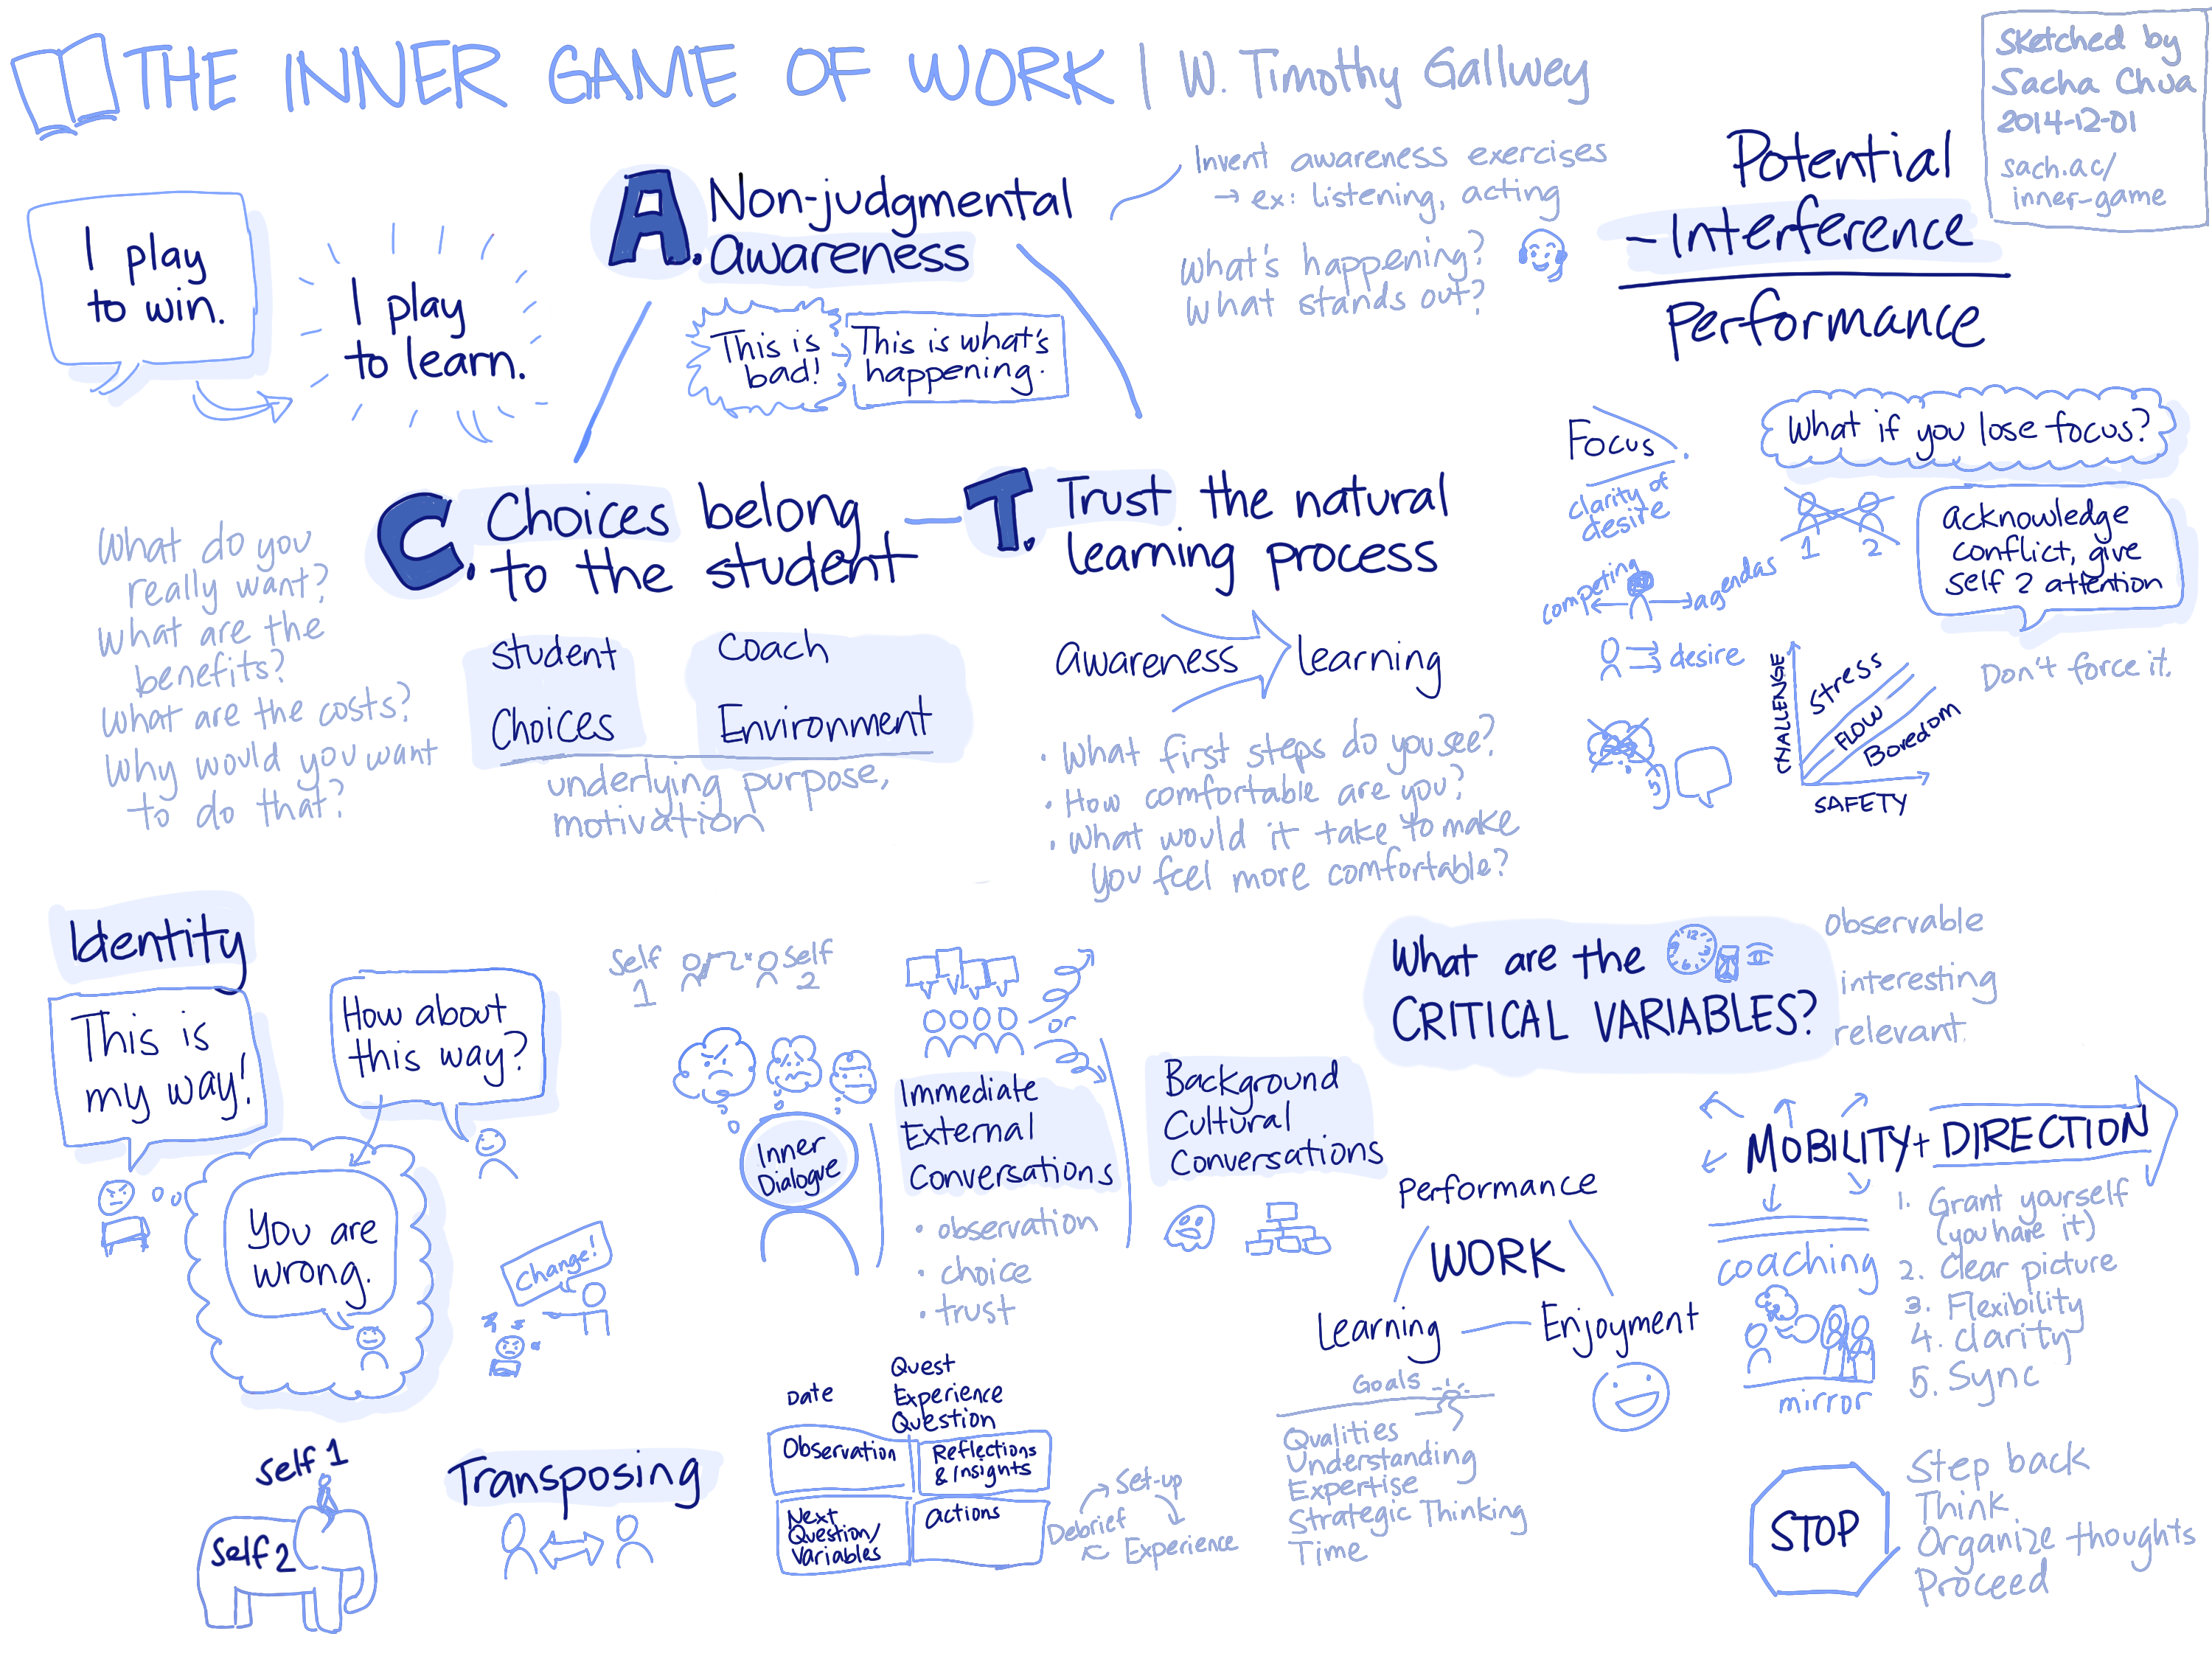 2014-12-01 Sketched Book - The Inner Game of Work - W Timothy Gallwey